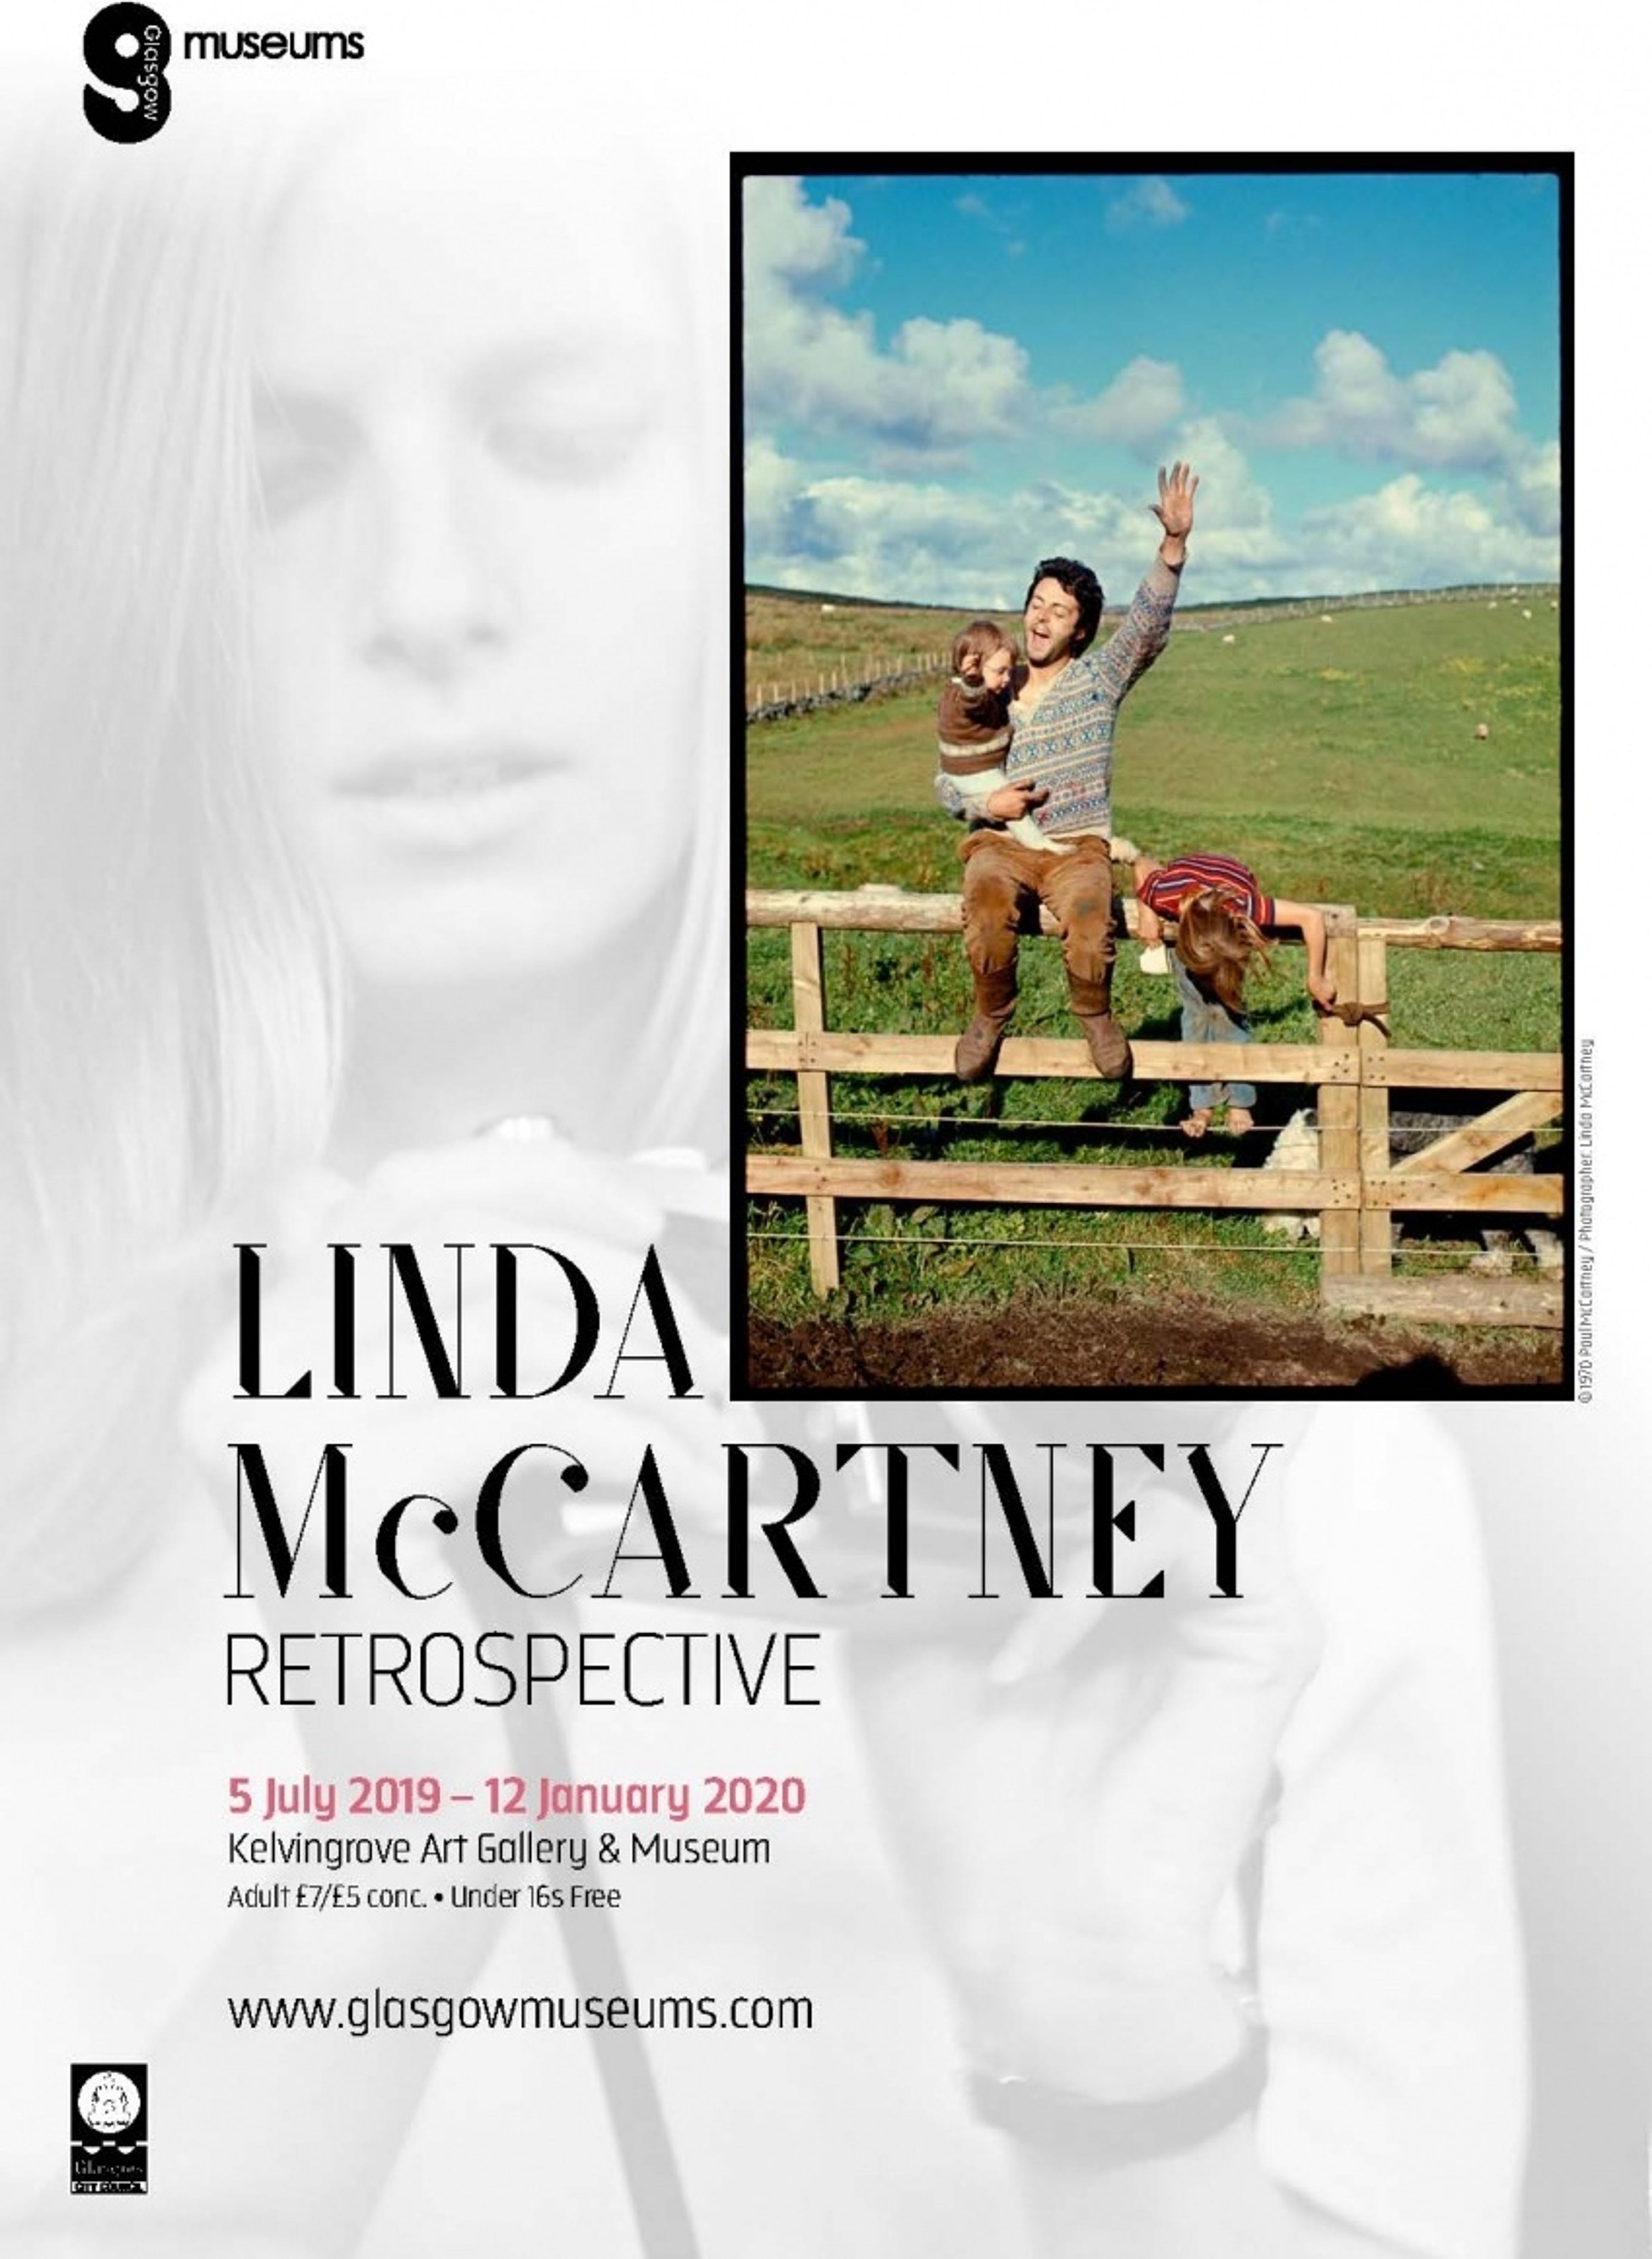 'The Linda McCartney Retrospective' opened in the UK for the first time at Kelvingrove Art Gallery and Museum in Glasgow.